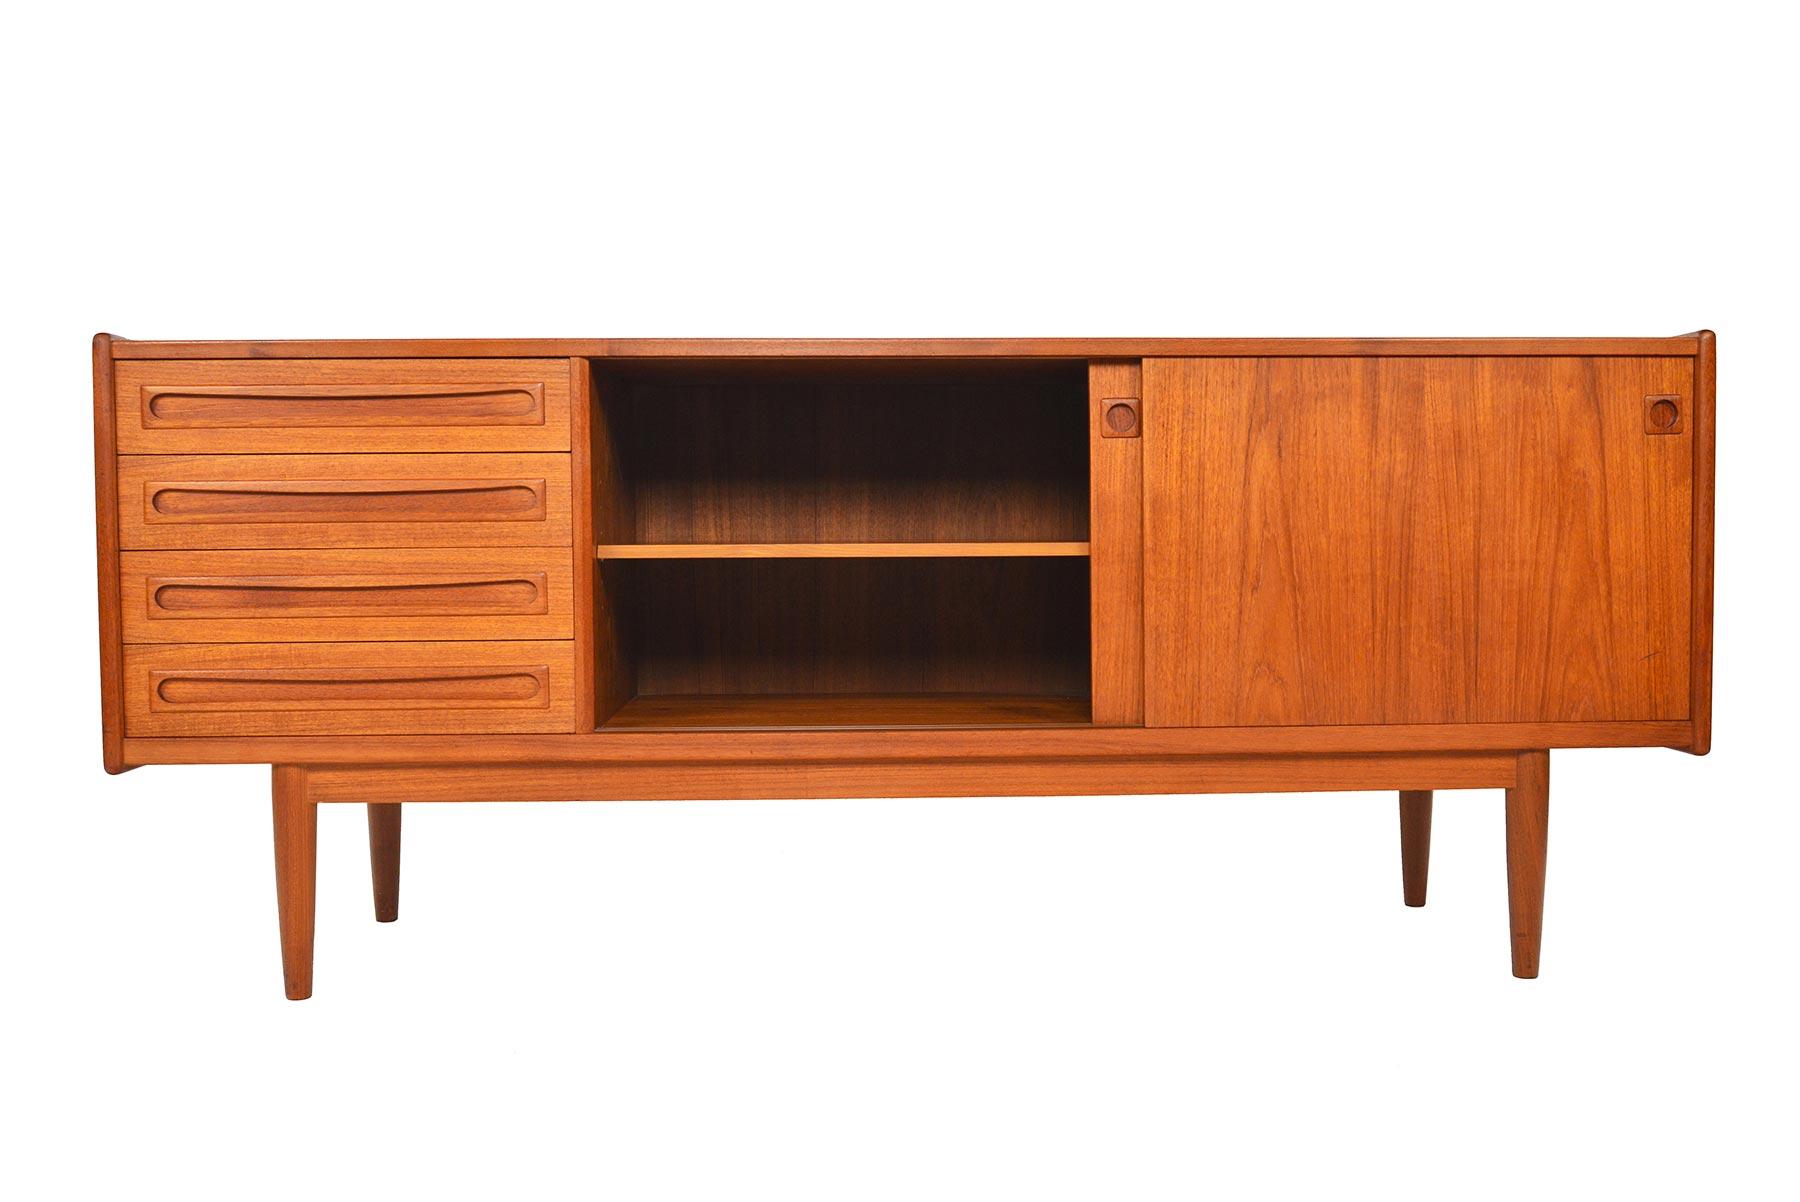 This beautiful Danish modern midcentury teak credenza by Jensen + Molholm offers a wonderfully functional configuration for modern living! Executed with clean lines and Minimalist details, center and right doors slide open to reveal adjustable